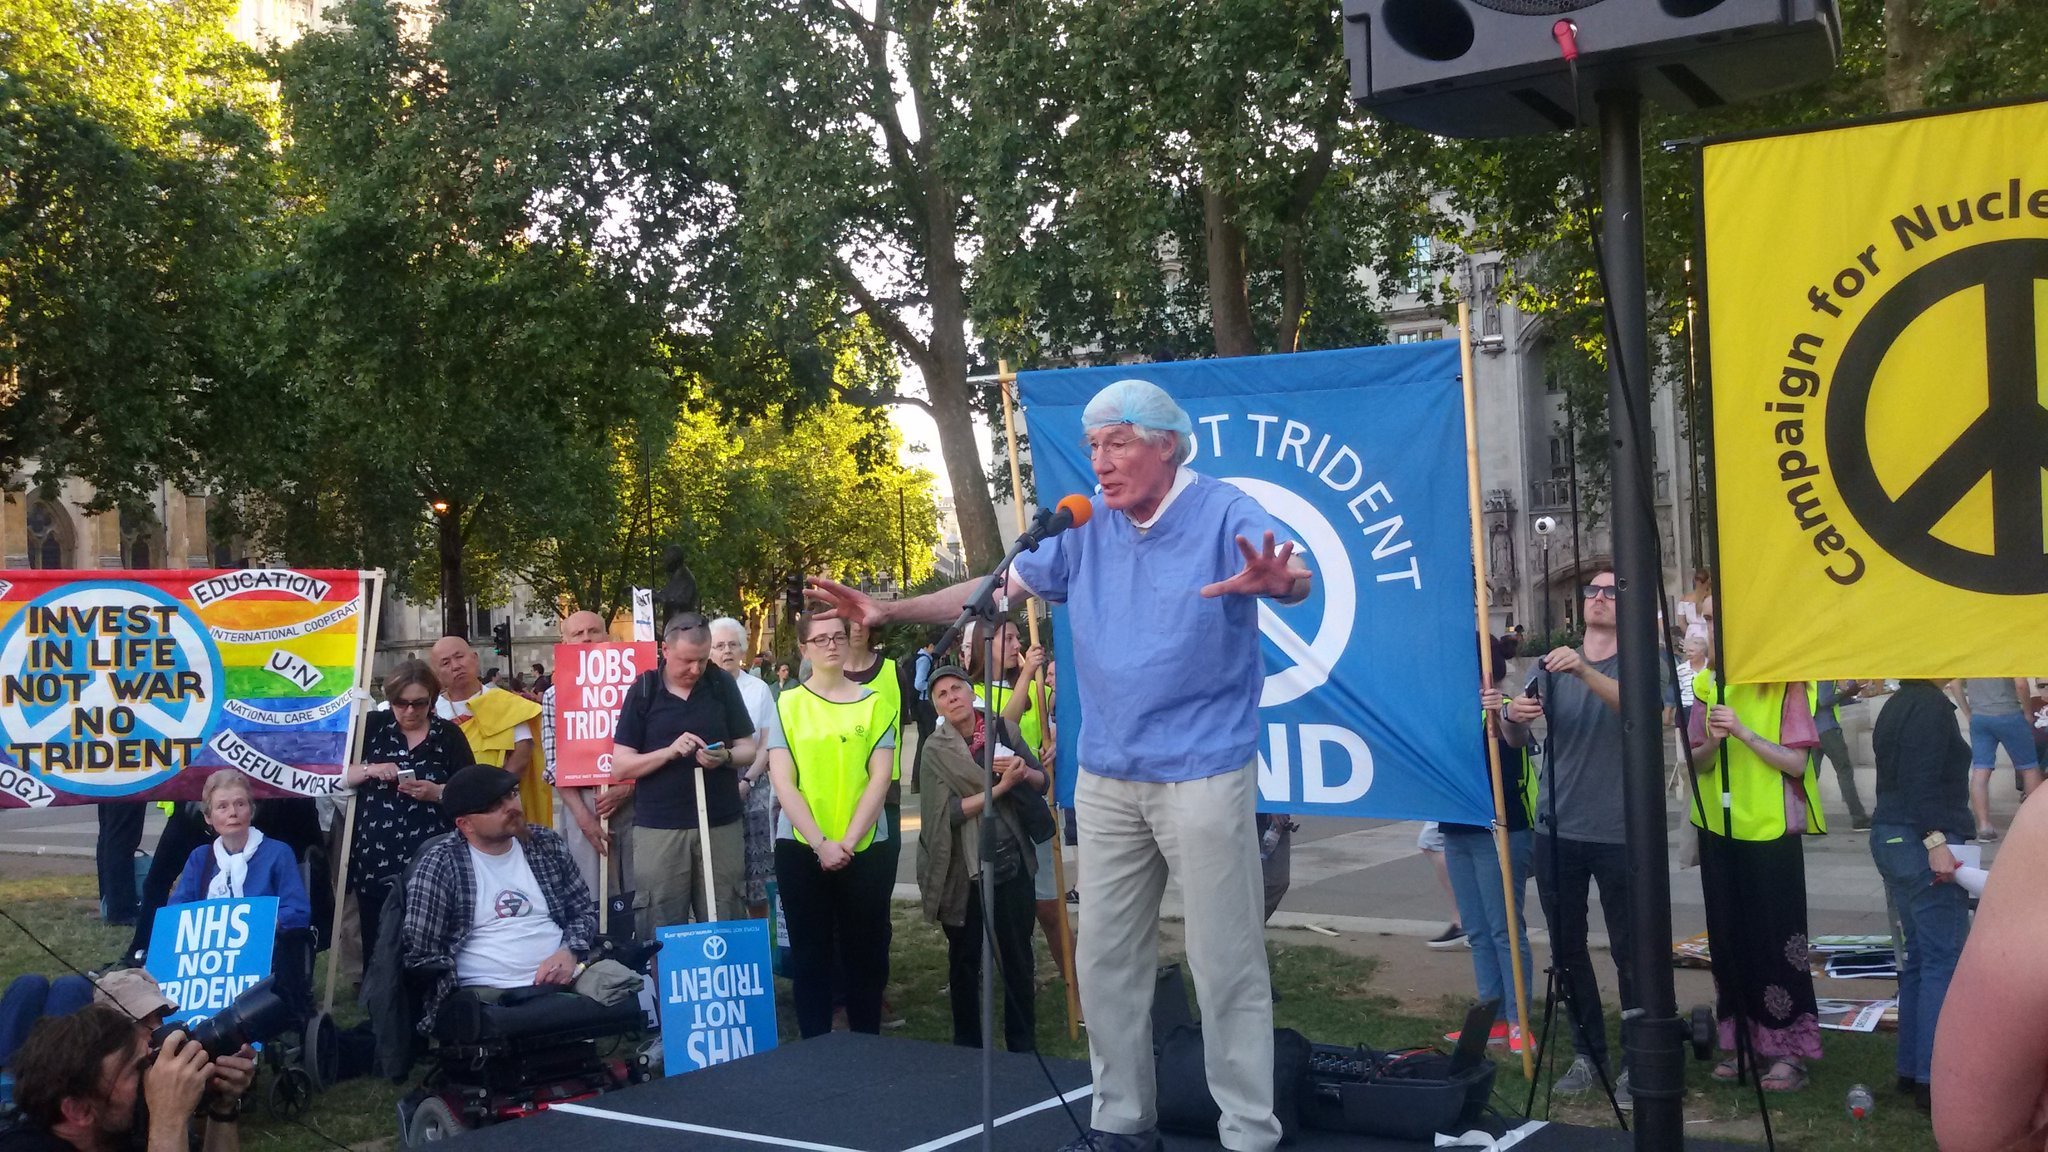 Dr Frank Boulton’s speech at the CND Trident Renewal Protest